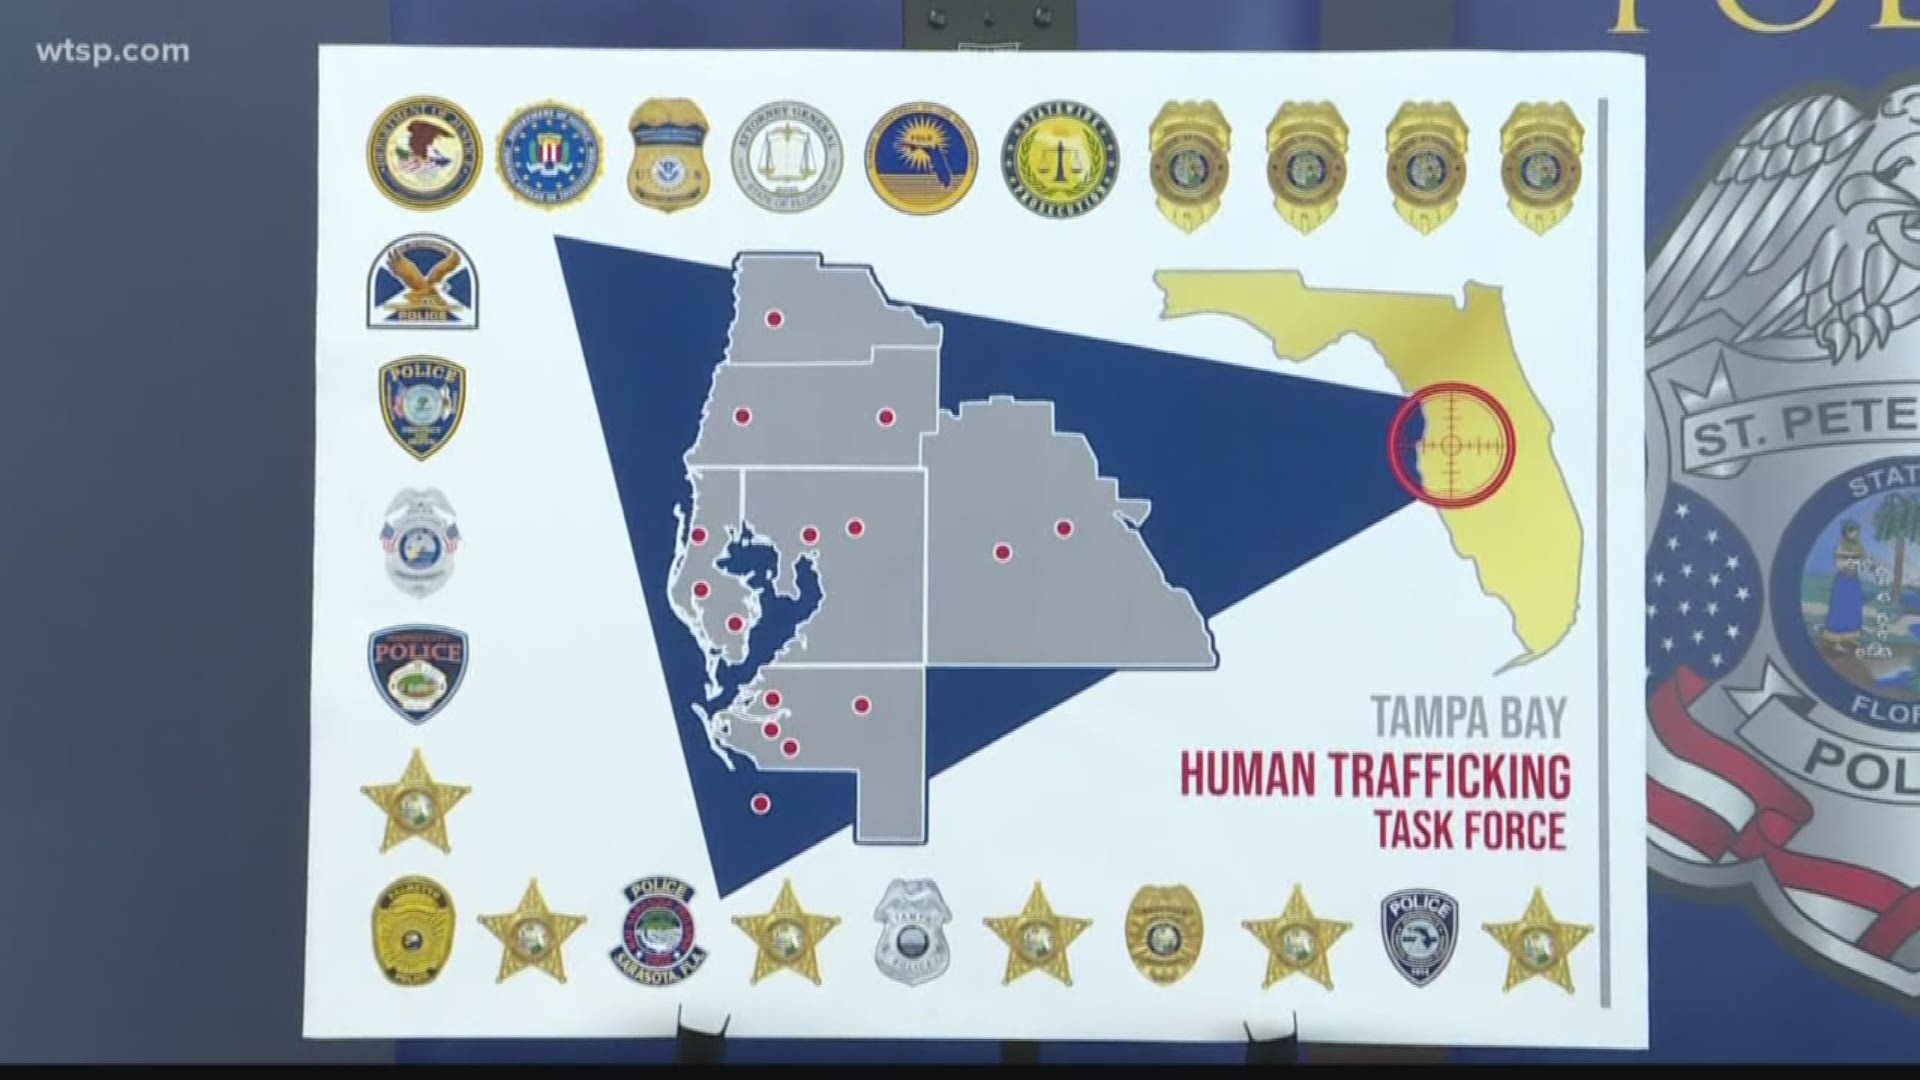 Local law enforcement agencies have renewed strength and resources when it comes to tackling human trafficking.